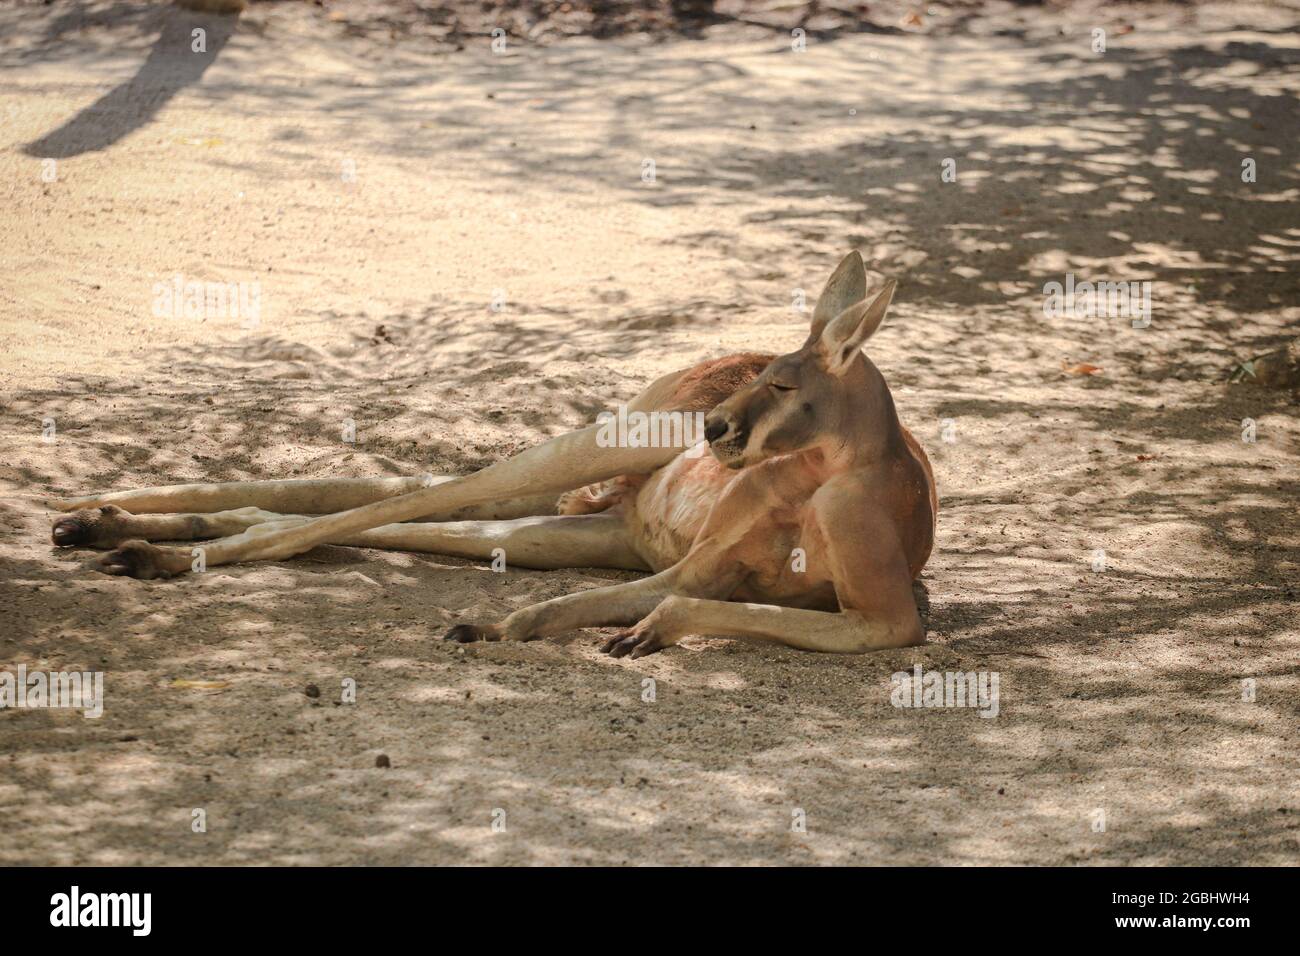 Big red kangaroo resting under the shade of a tree Stock Photo